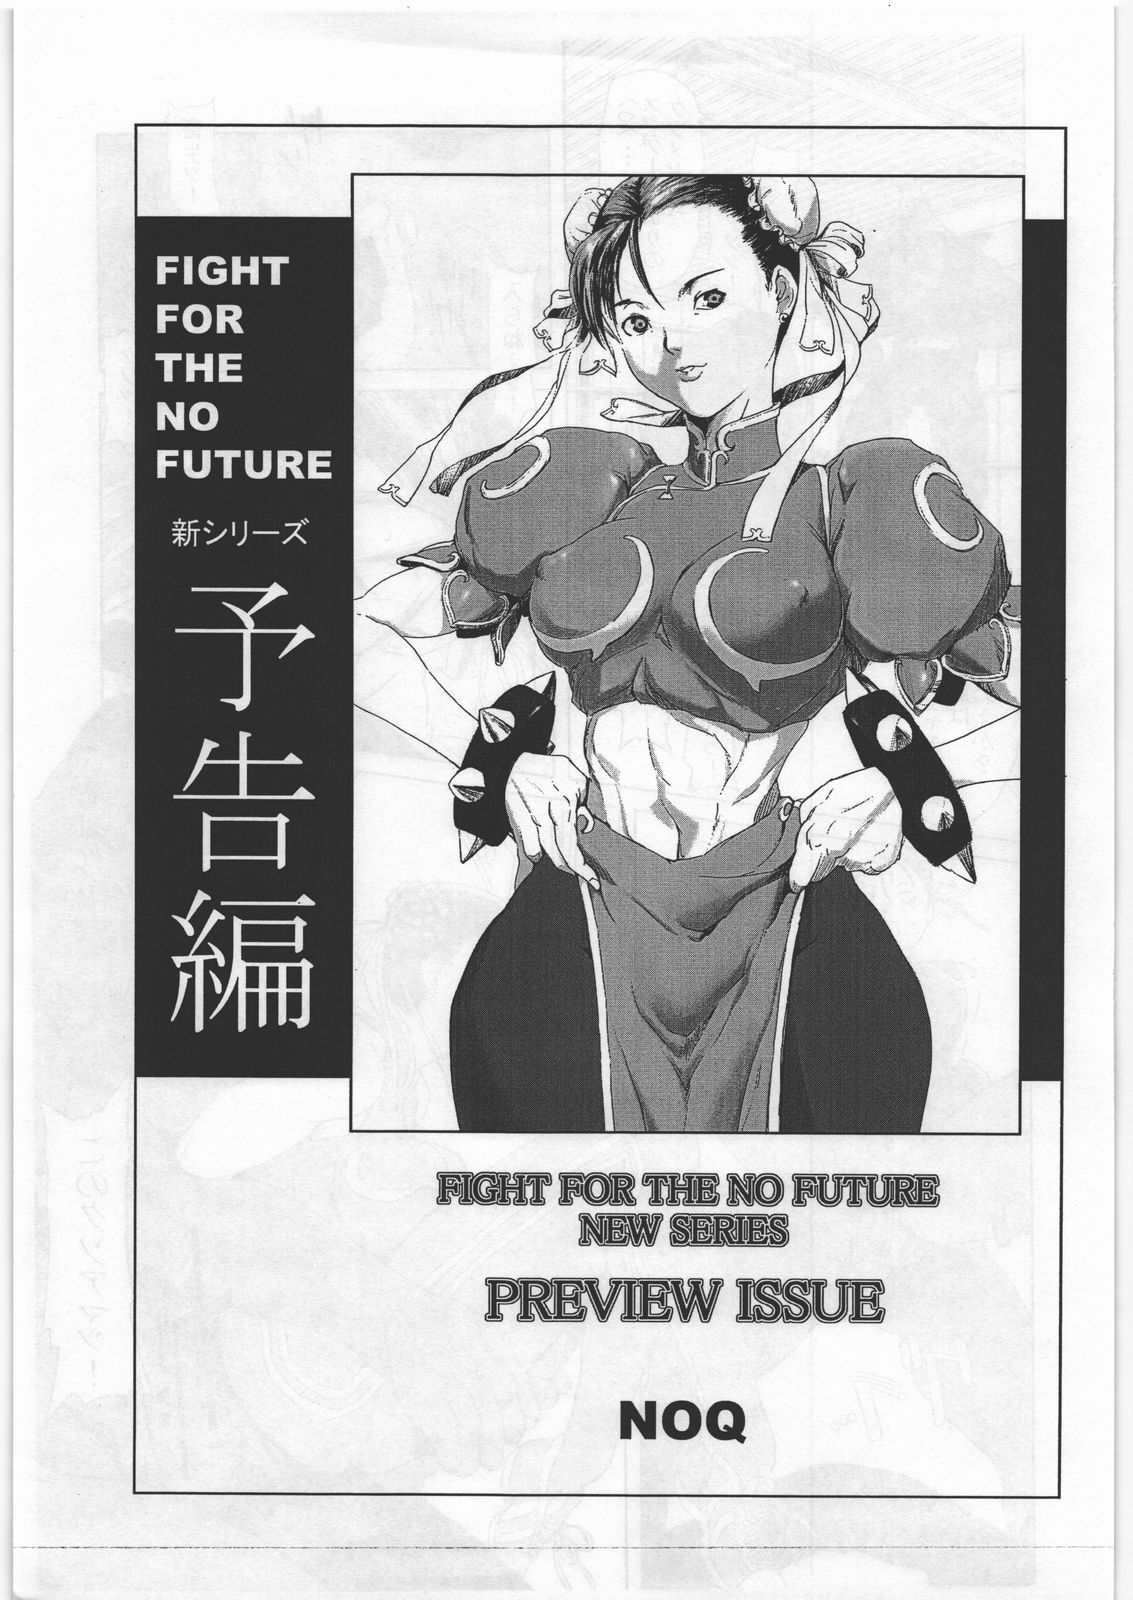 (C70) [Hanshi x Hanshow (NOQ)] FIGHT FOR THE NO FUTURE NEW SERIES PREVIEW (Street Fighter) page 2 full